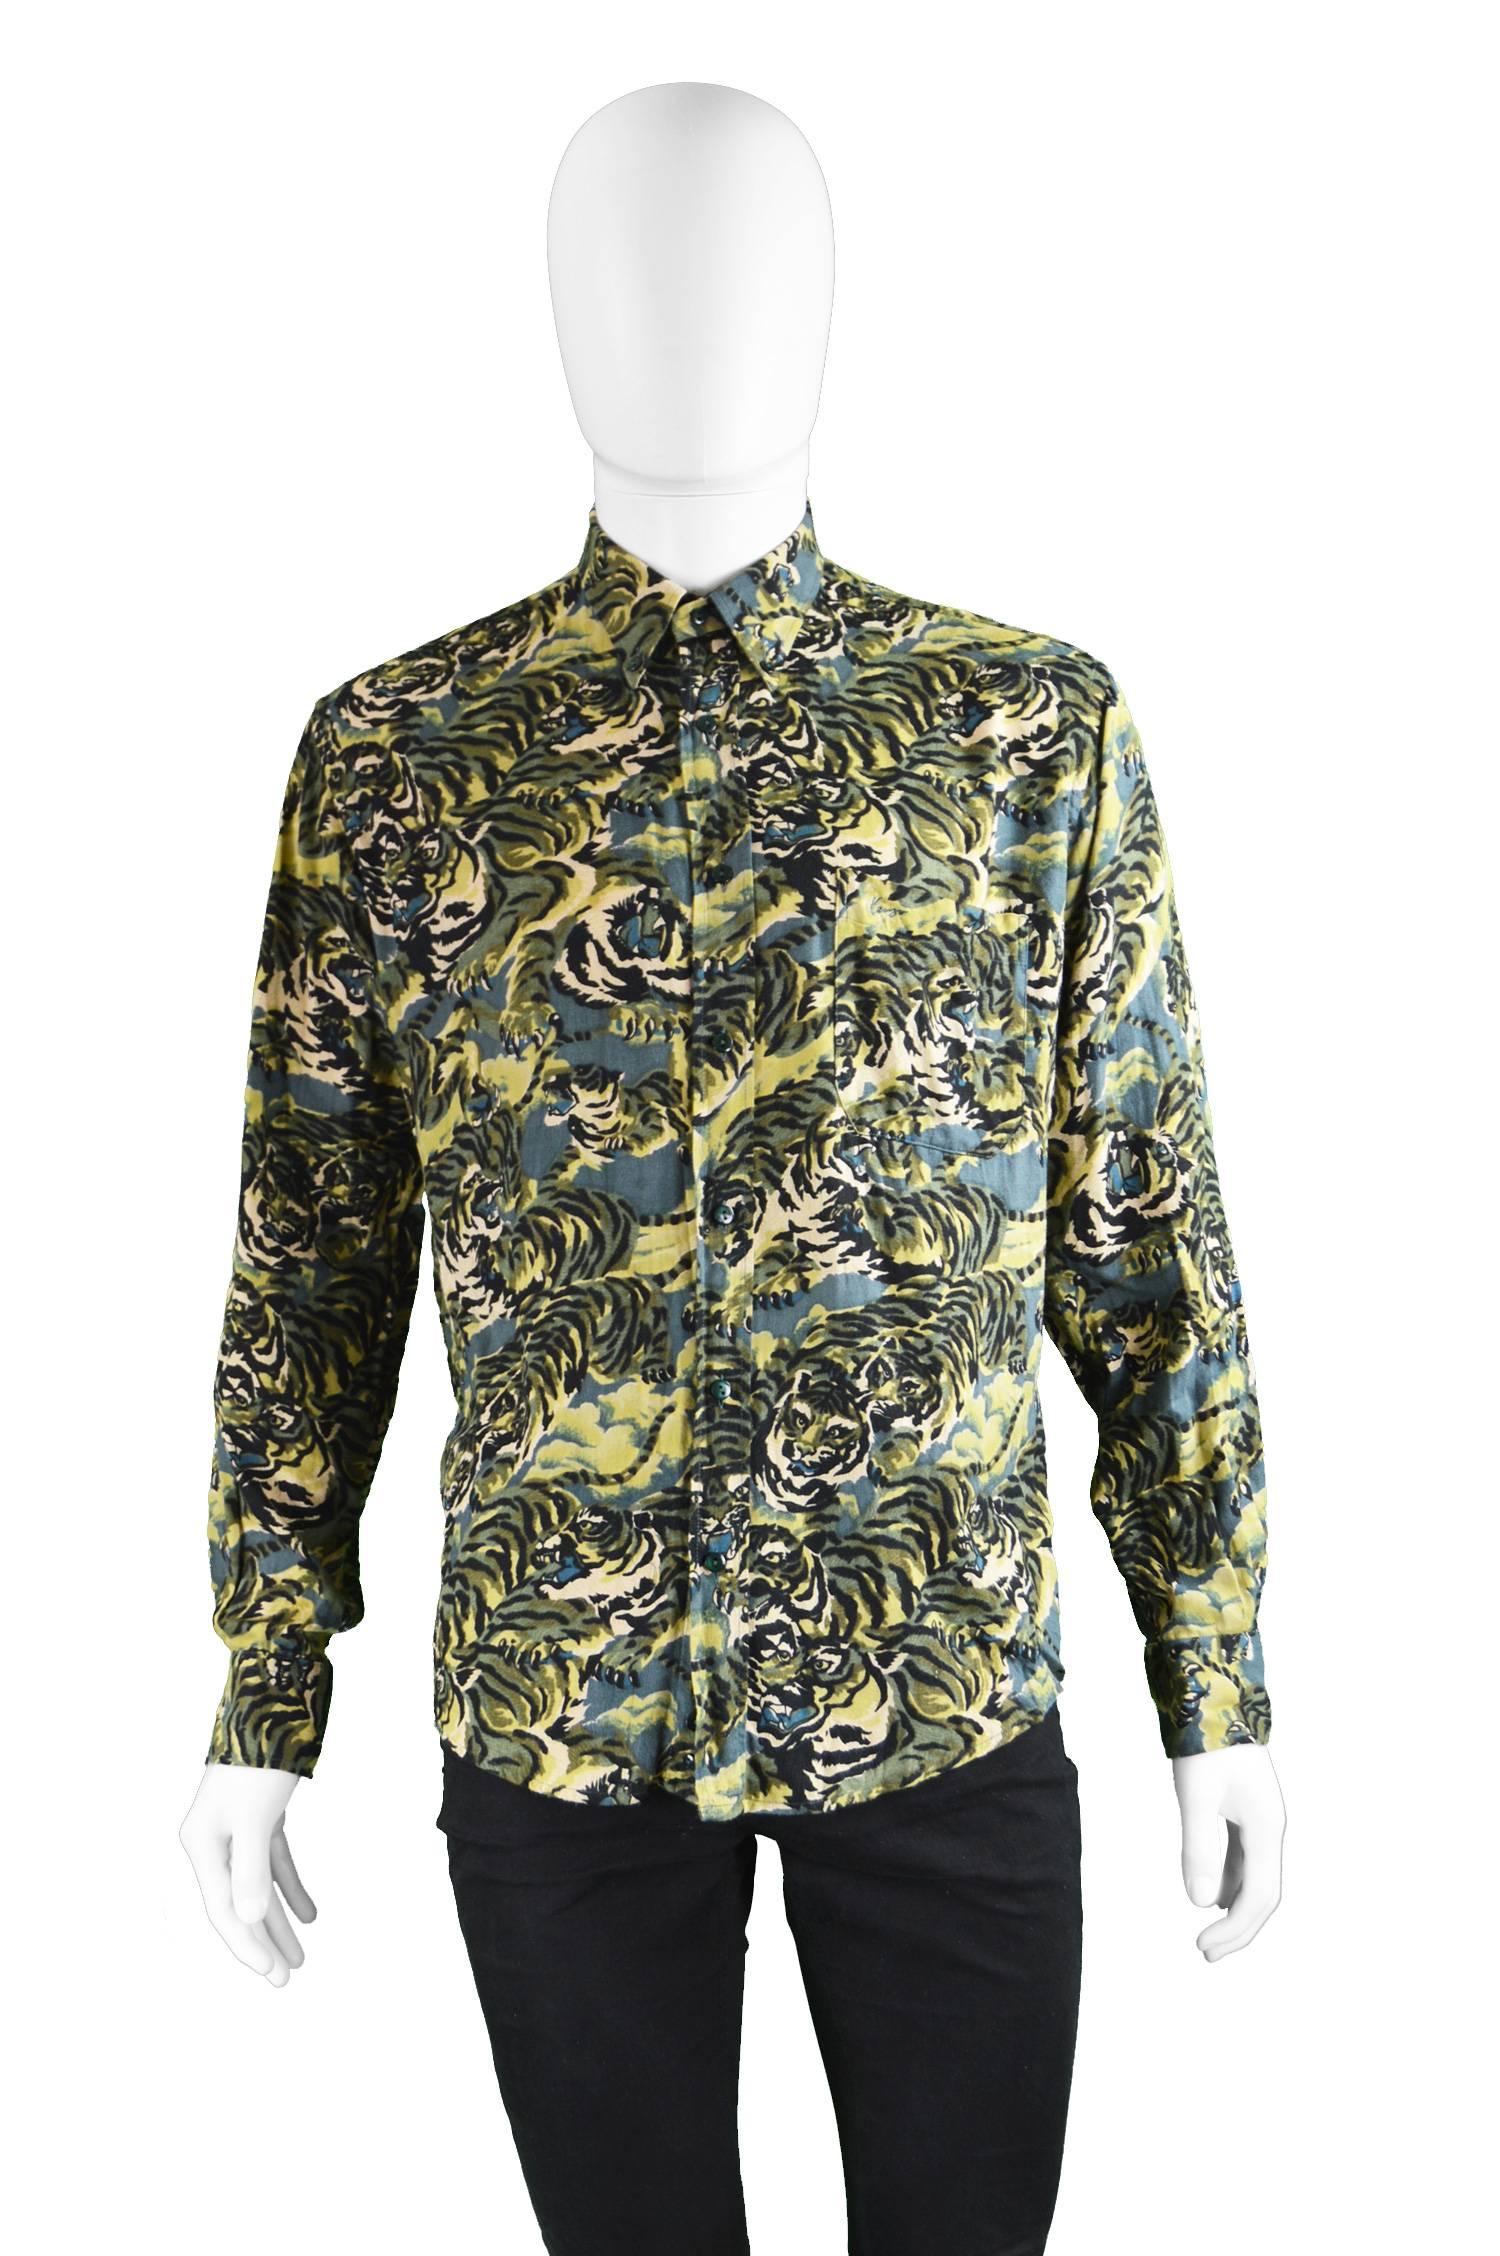 Kenzo Men's Vintage Iconic 'Flying Tiger' Print Button Down Shirt, 1990s

Estimated Size: Best fits a Medium to Large with an intended loose fit. Check measurements to ensure best fit) 
Chest - 46” / 117cm
Length (Shoulder to Hem) - 25” /